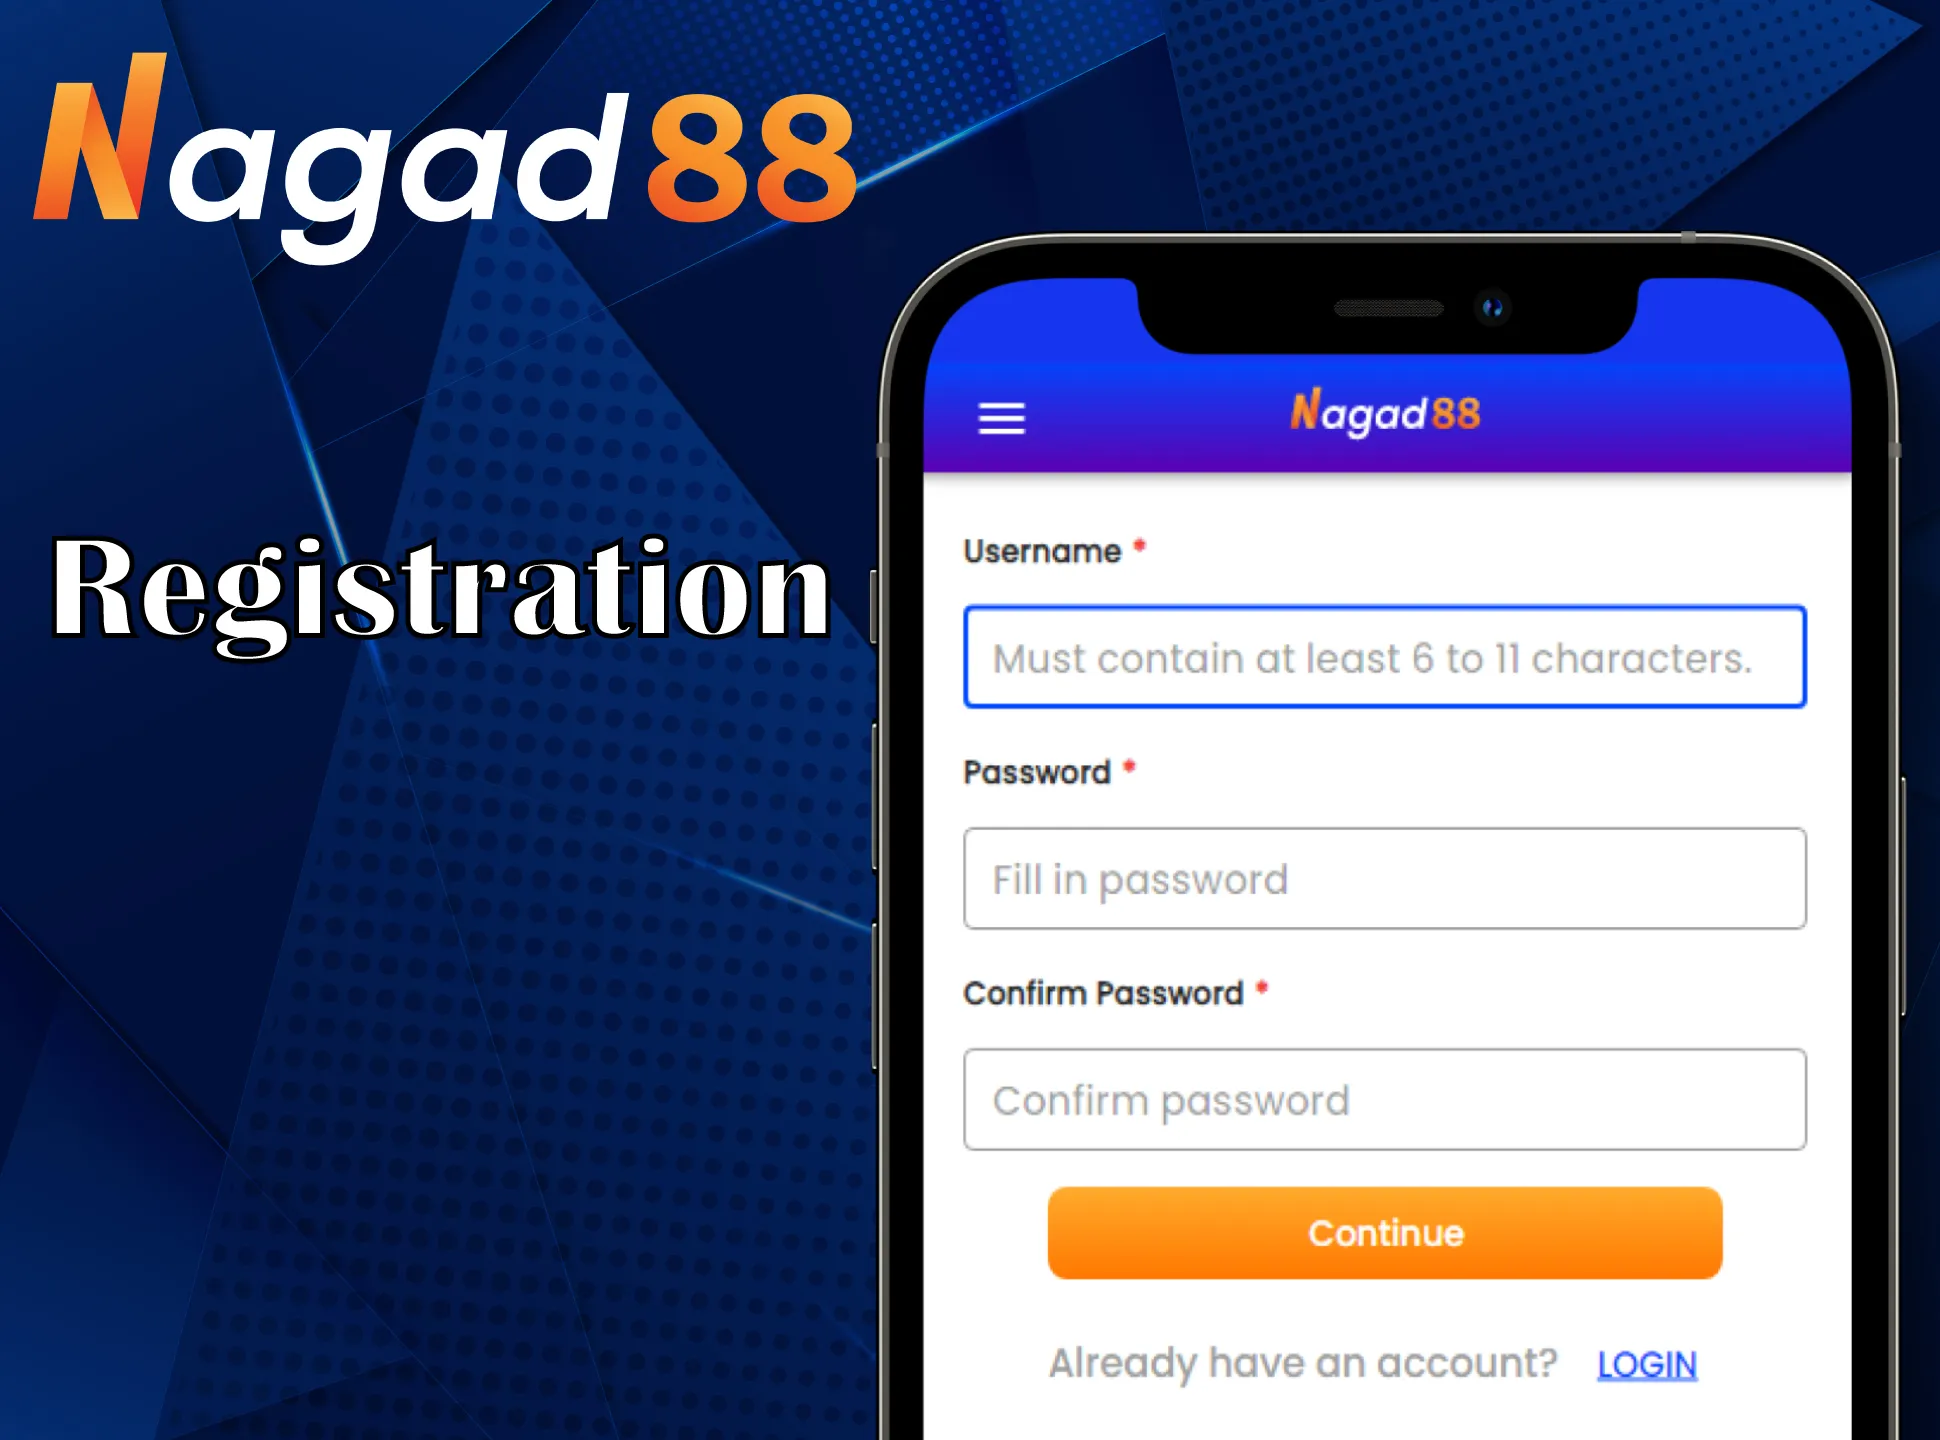 Complete a simple registration in the Nagad88 app.